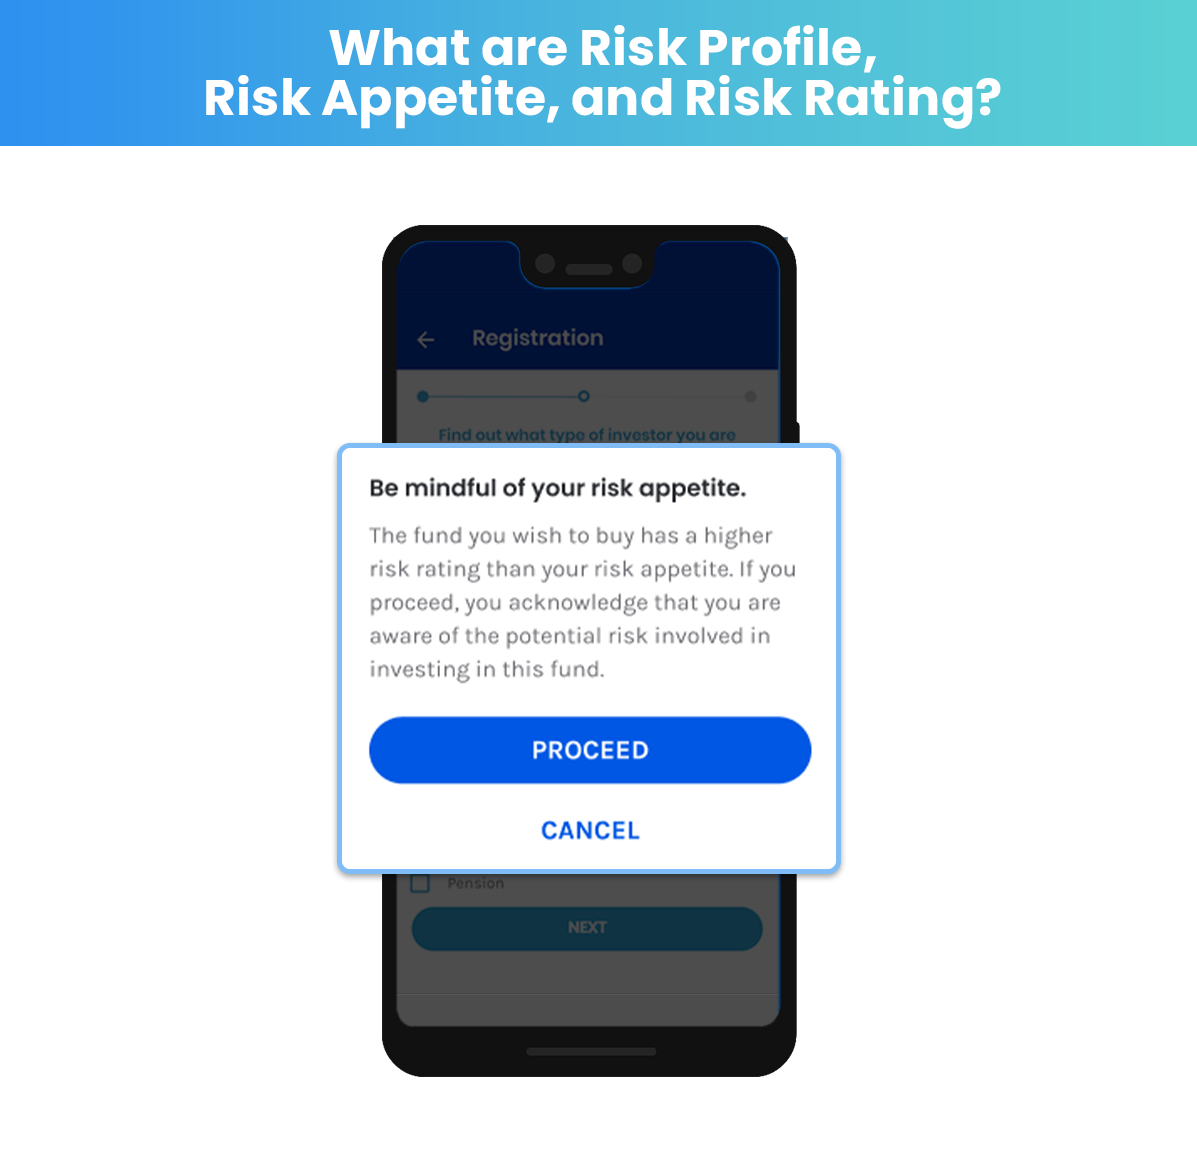 What_are_Risk_Profile__Risk_Appetite__and_Risk_Rating_Prompt.png